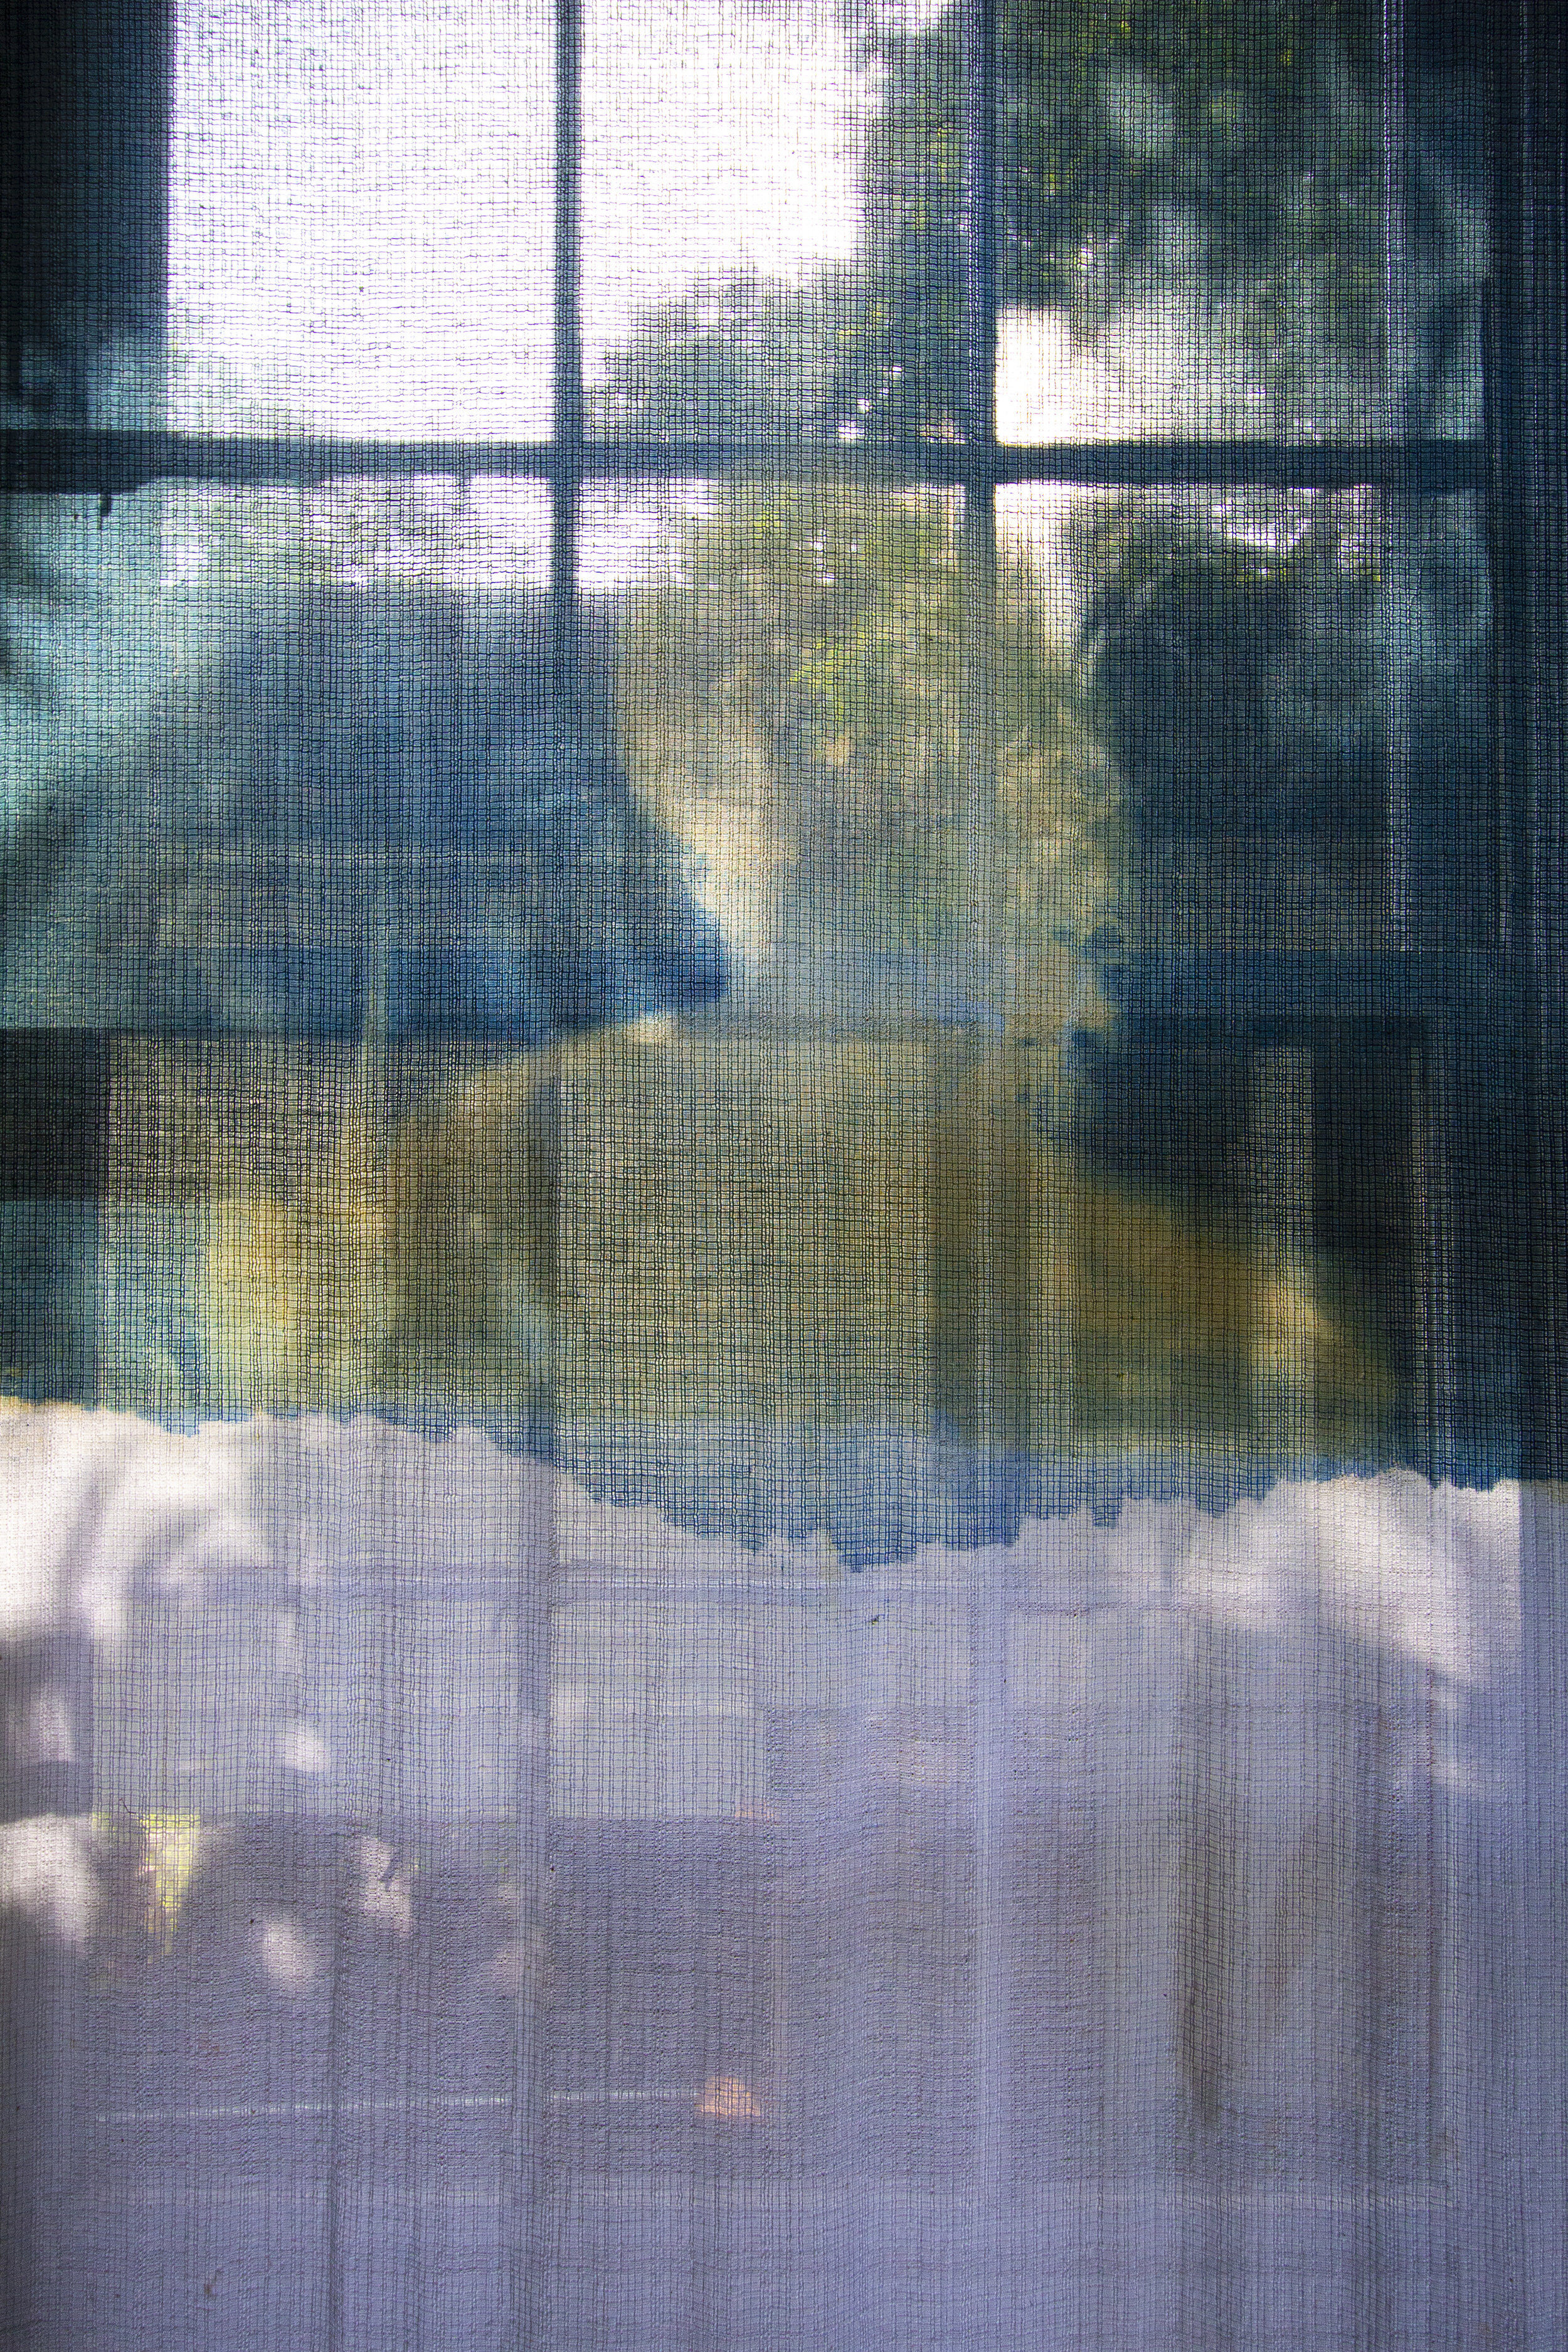 Sunrise (detail) [late afternoon], 2020, cotton curtain, cyanotype solution, curtain rod, and hardware, 55 x 84 inches